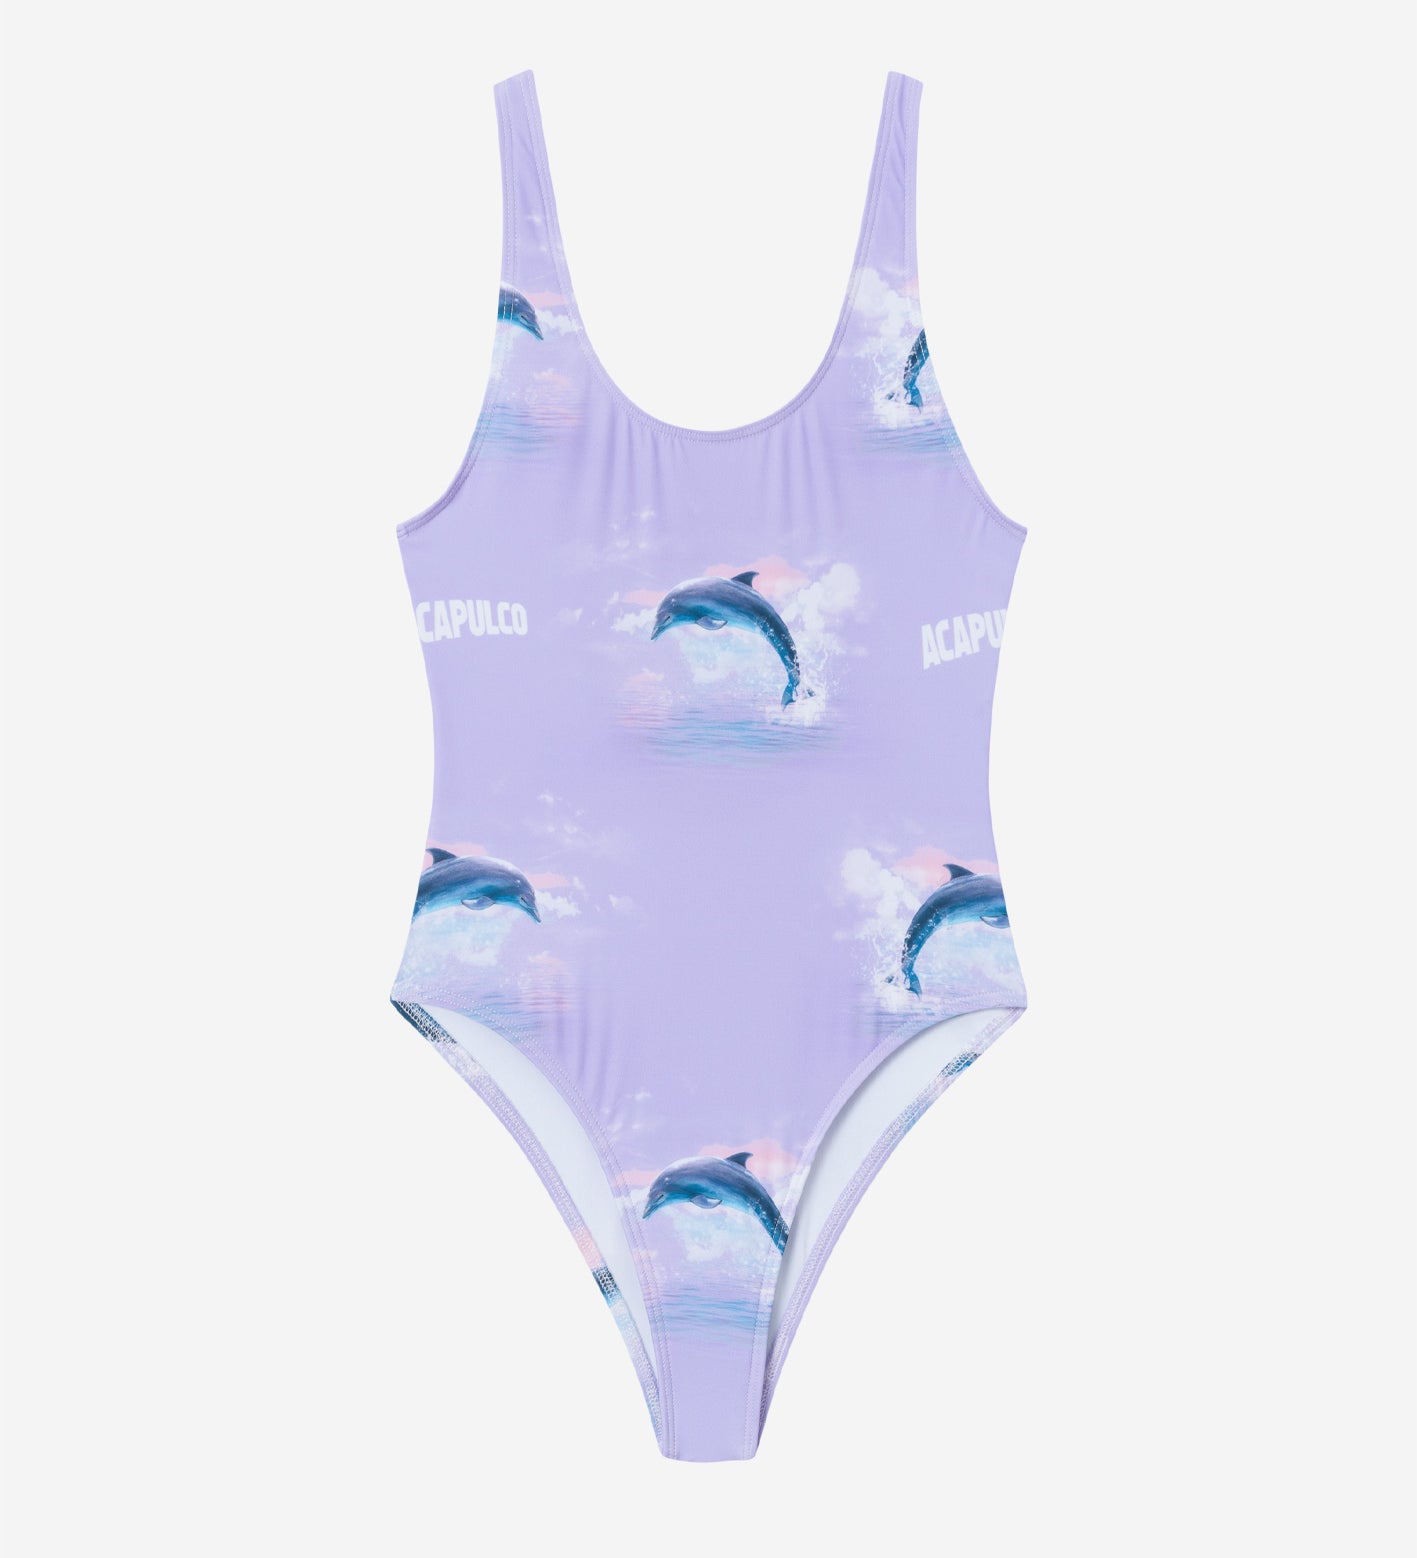 Purple swimsuit with dolphins and text print